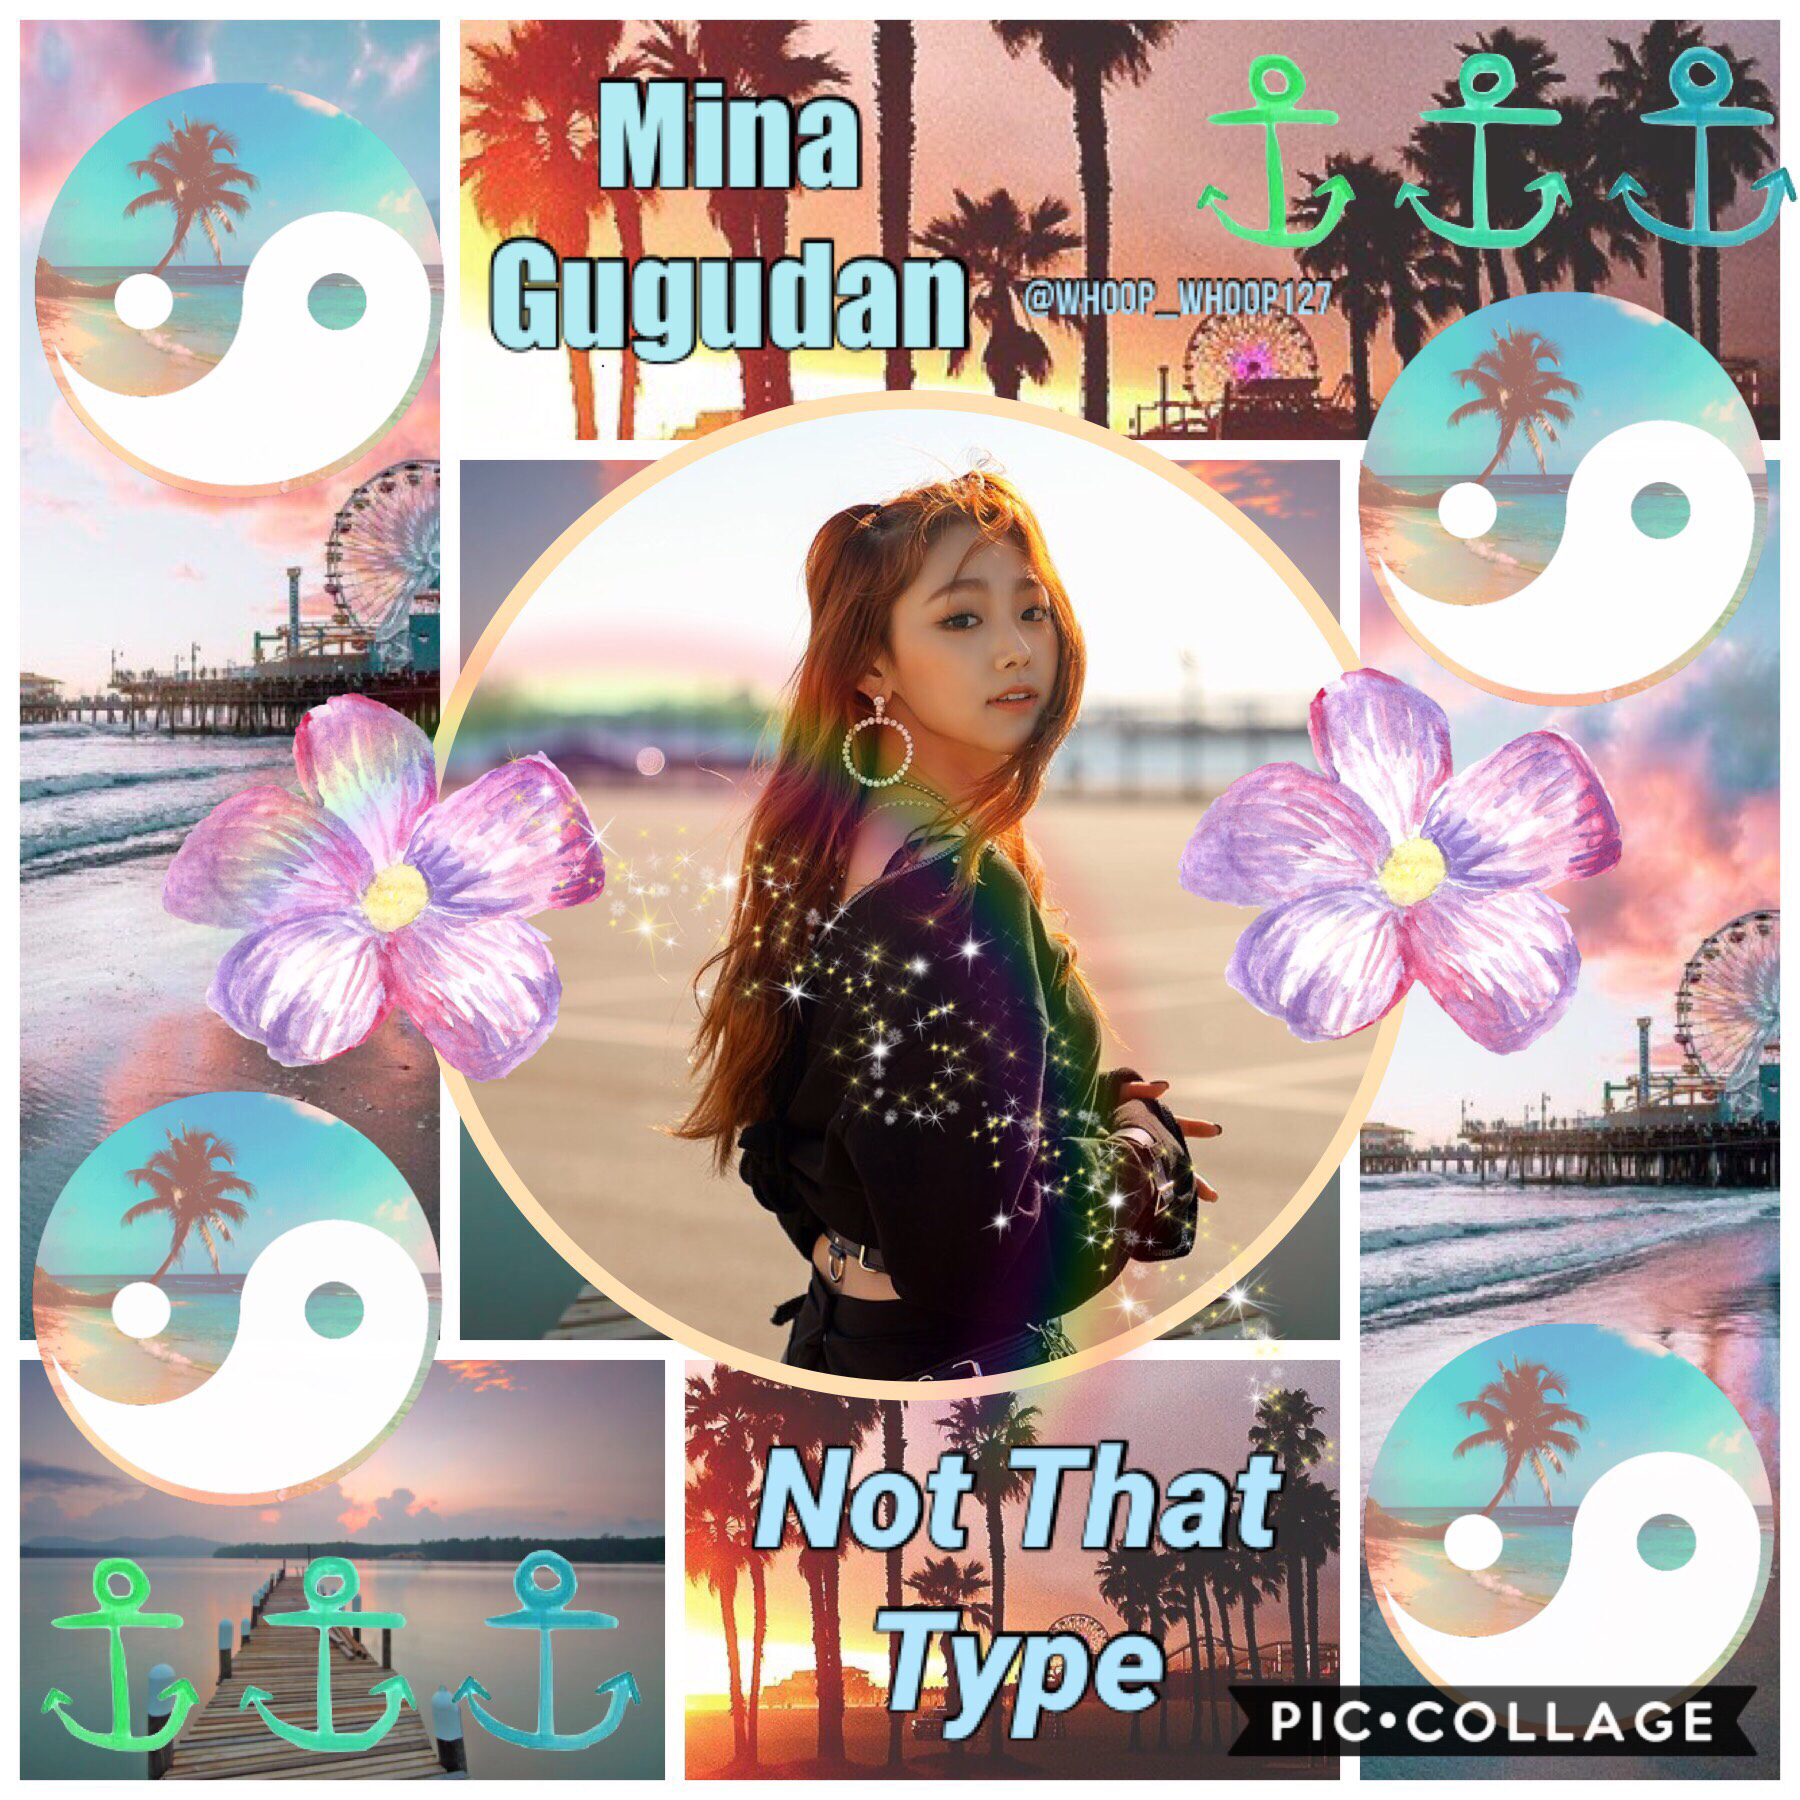 •🚒•
🍂Mina~Gugudan🍂
Omg if you haven’t listened to Not That Type by Gugudan then what are you doing it’s an actual BOP and I’m not KIDDING. Even my mom likes it. Super hype~
Btw WHY IS IT SNOWING SO MUCH UGHHHHH😂😭
Also I have a really 🔥 photo of Hyunjin as